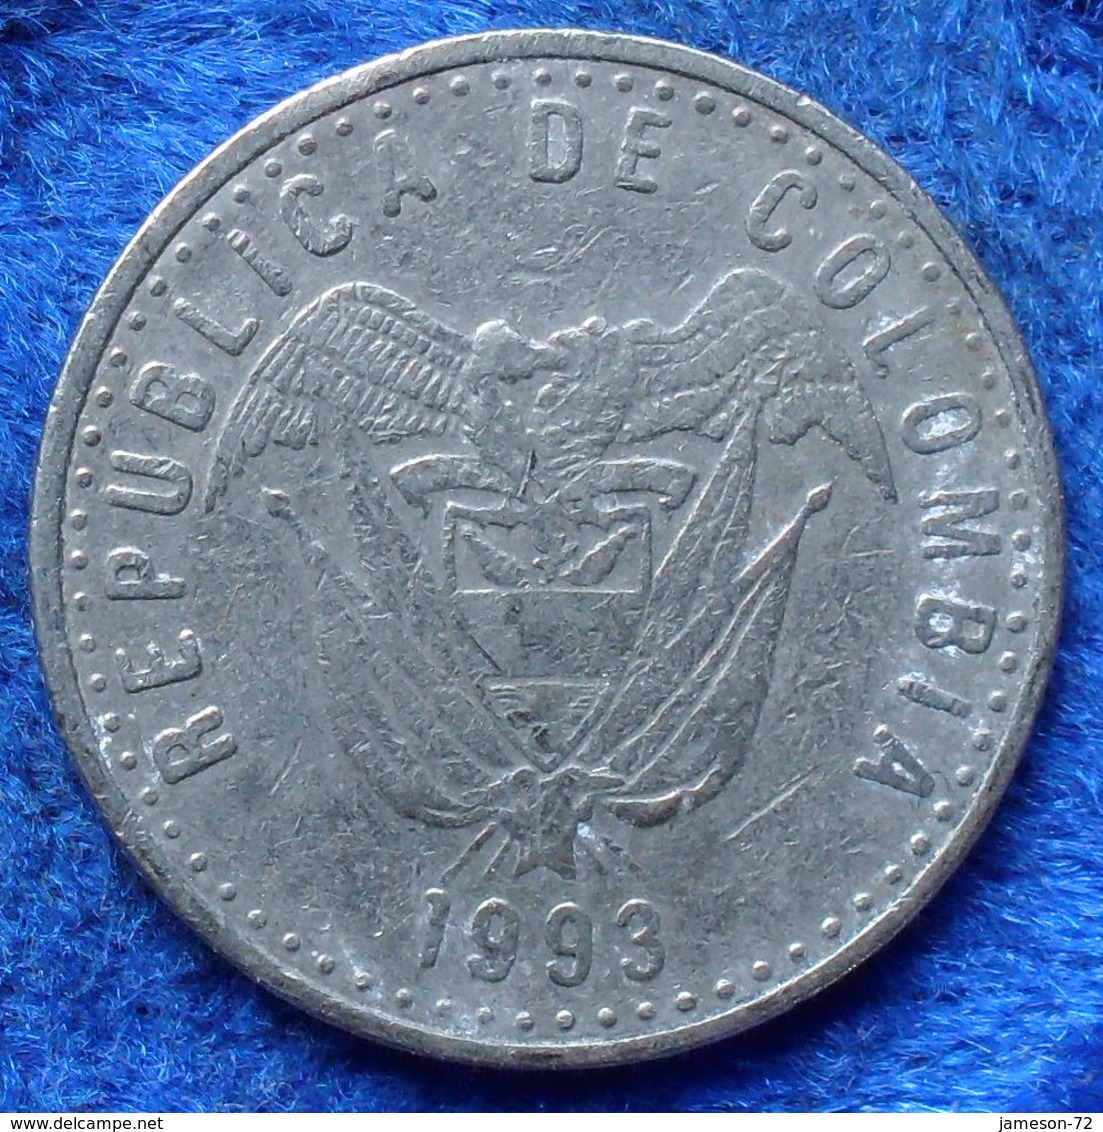 COLOMBIA - 50 Pesos 1993 KM# 283.1 Republic America - Edelweiss Coins - Colombia